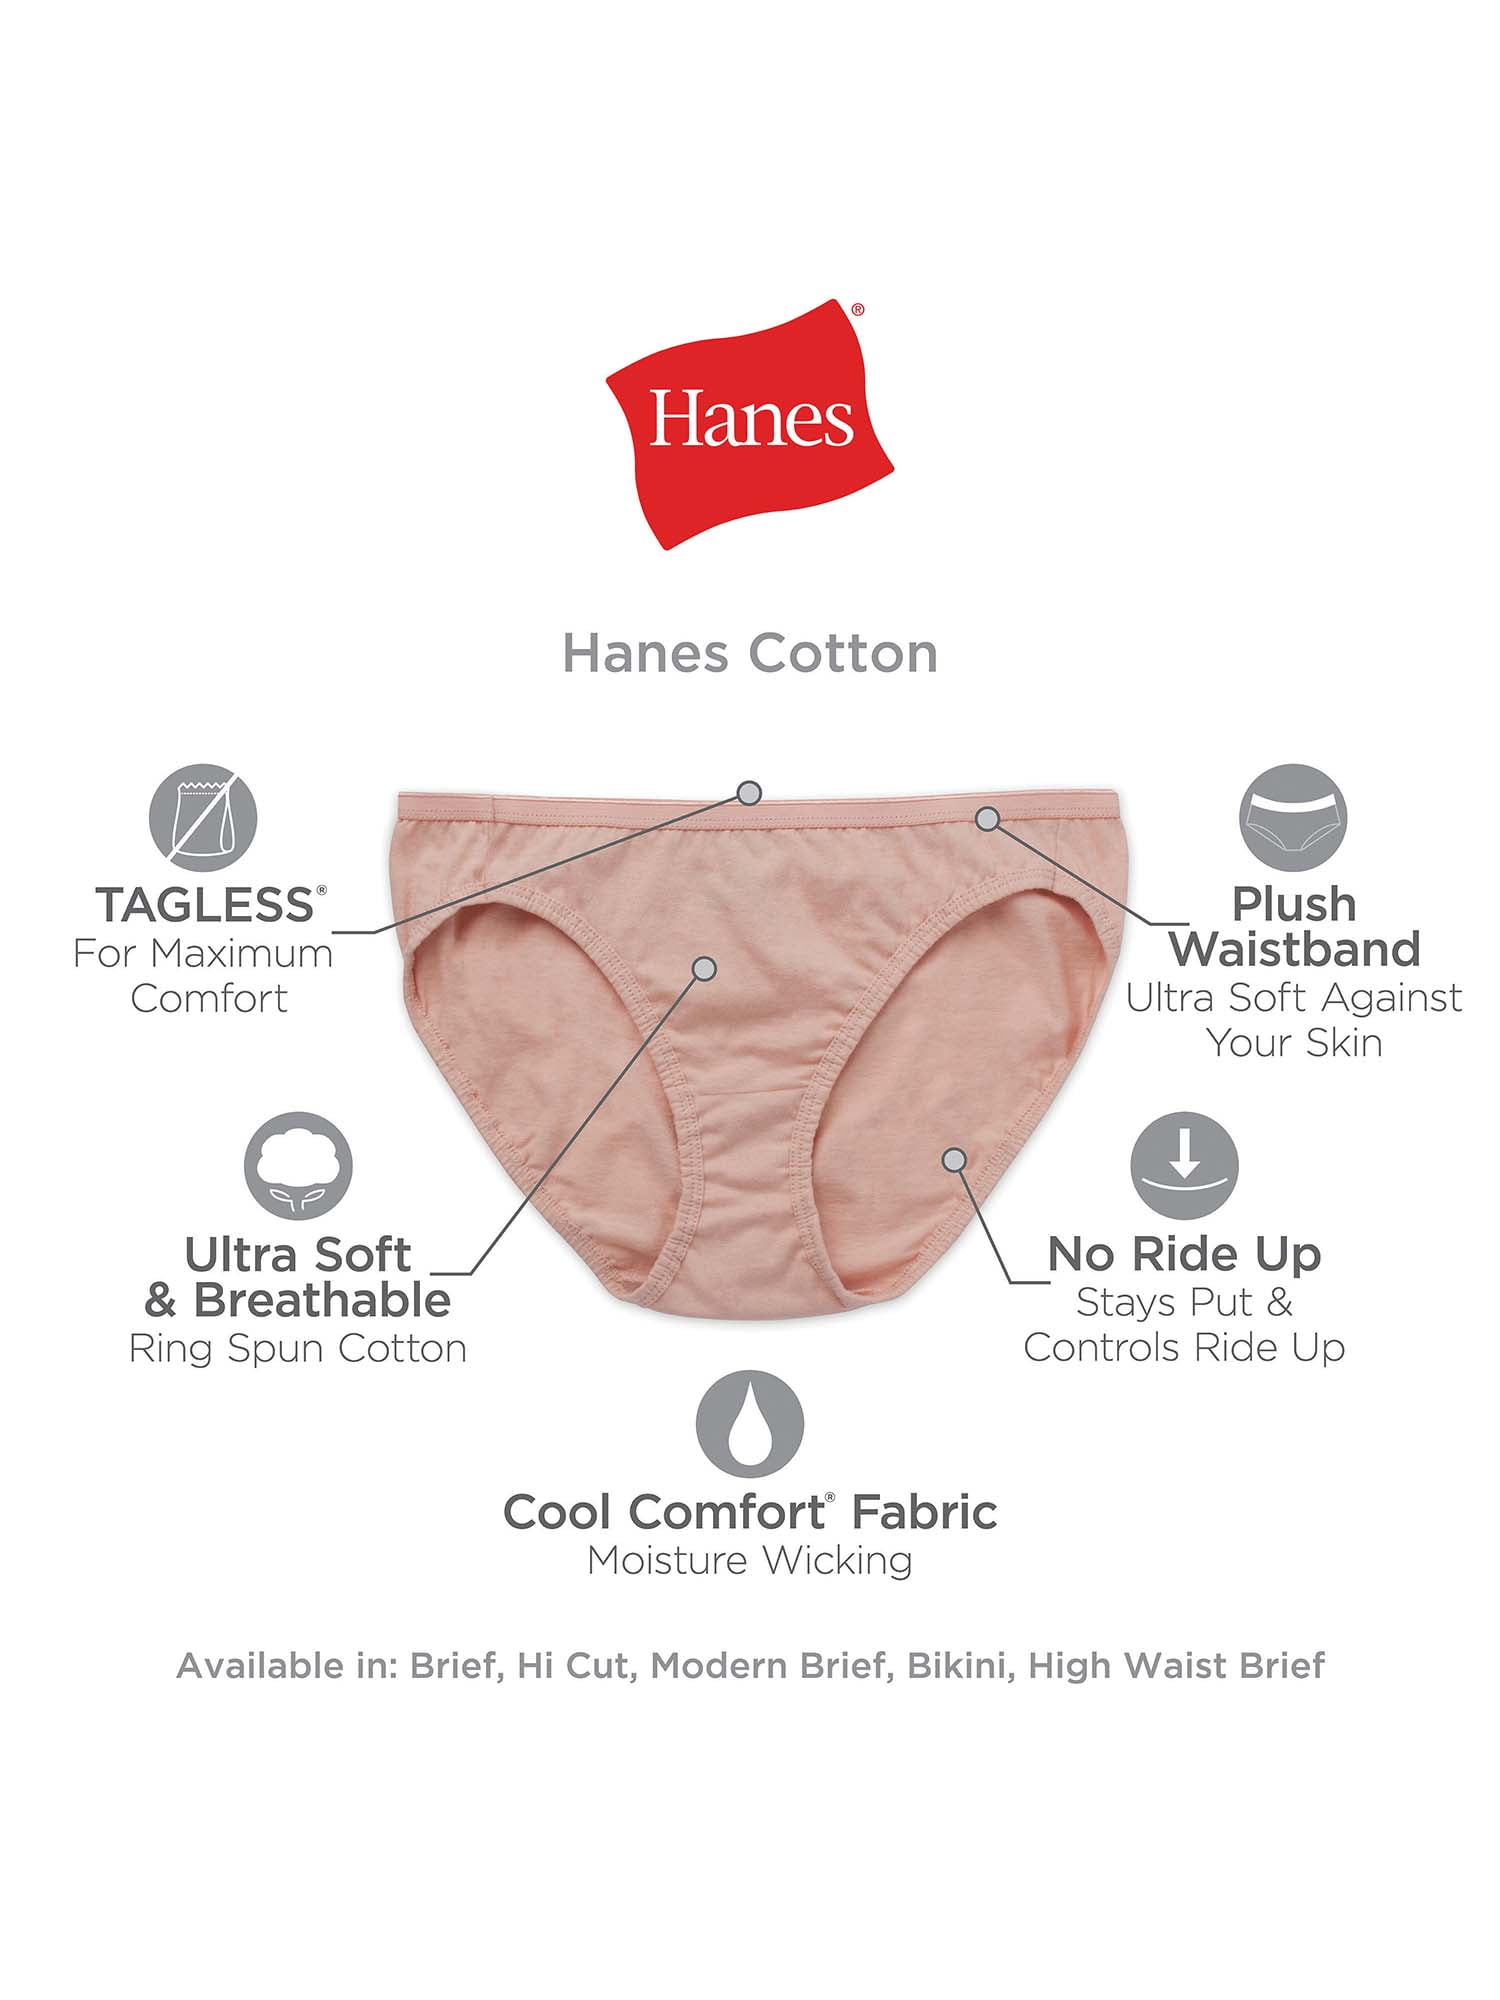 Hanes Womens Brief Panties 20 Pack, Moisture-Wicking Cotton Brief Underwear  (Colors May Vary)